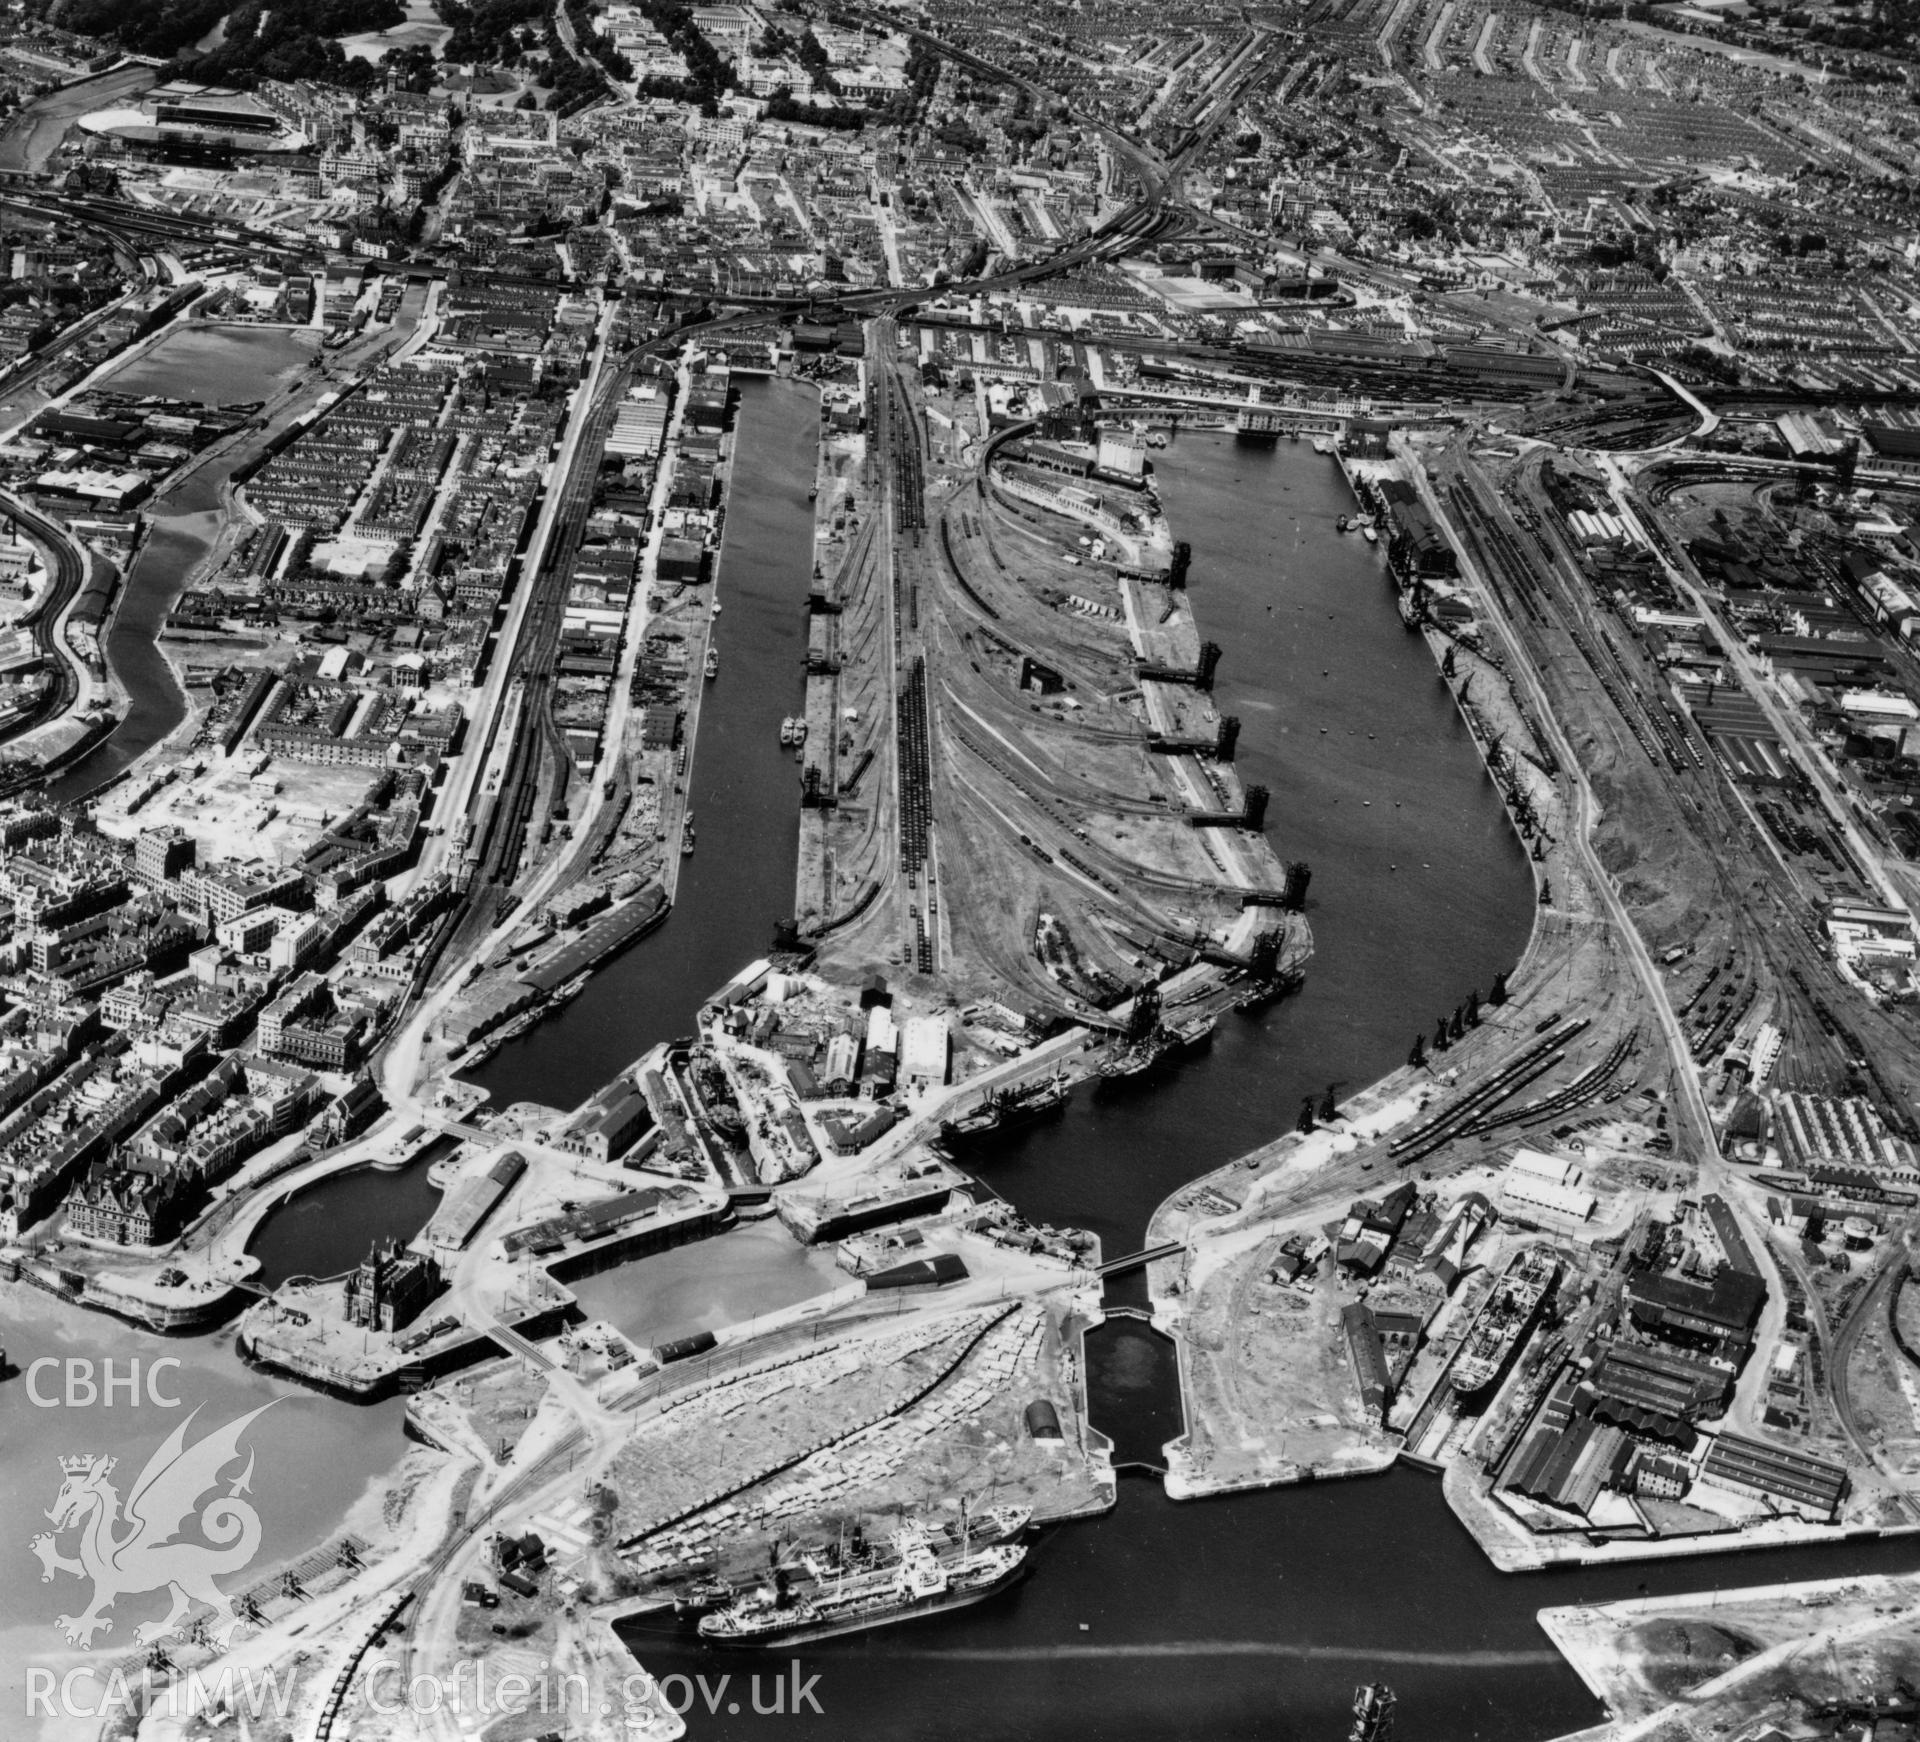 View of Cardiff docks from the south showing East and West Butes docks. Oblique aerial photograph, 5?" cut roll film.